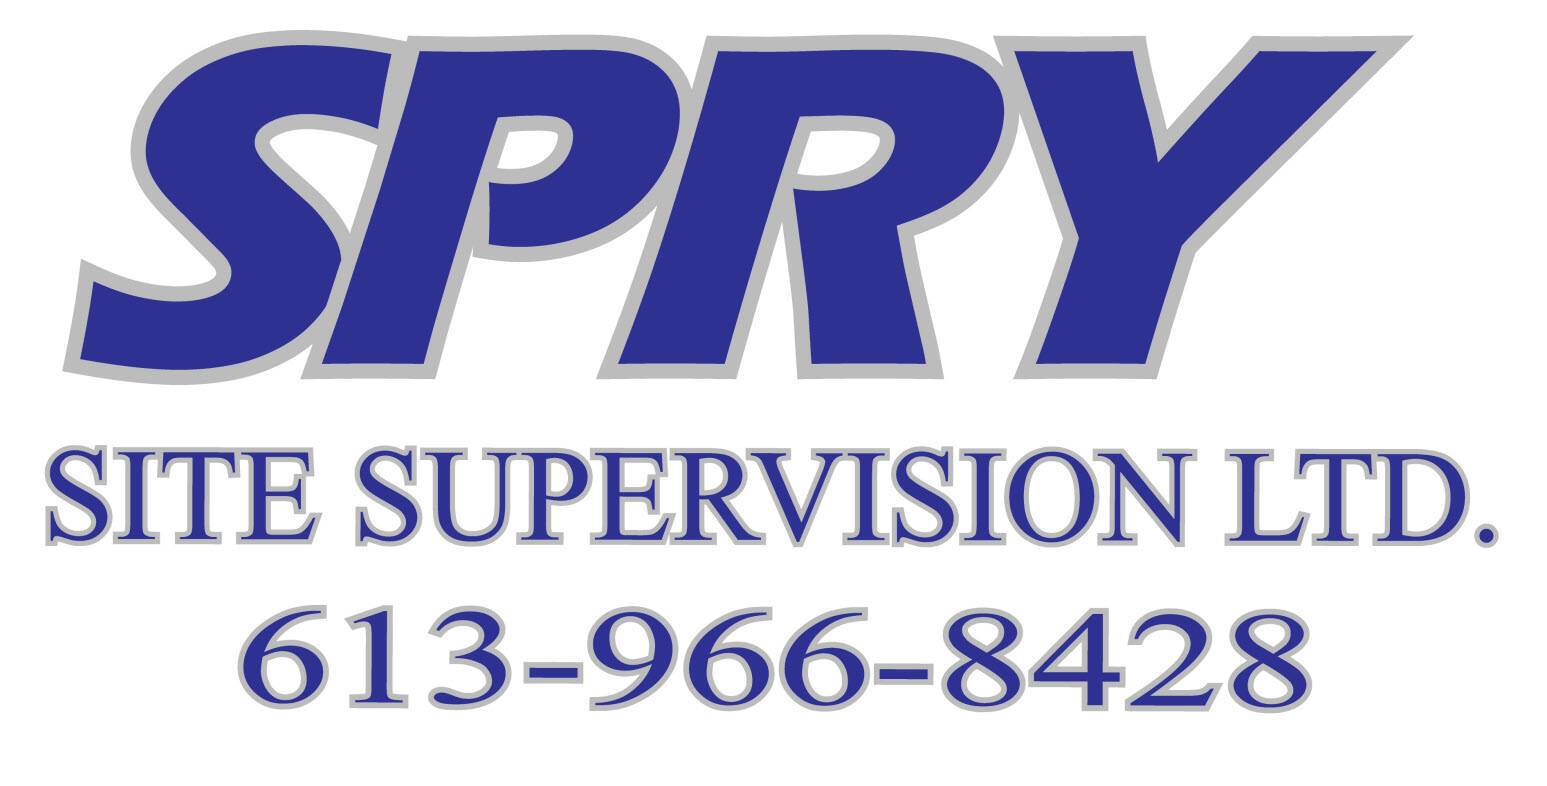 Spry Site Supervision LTD.